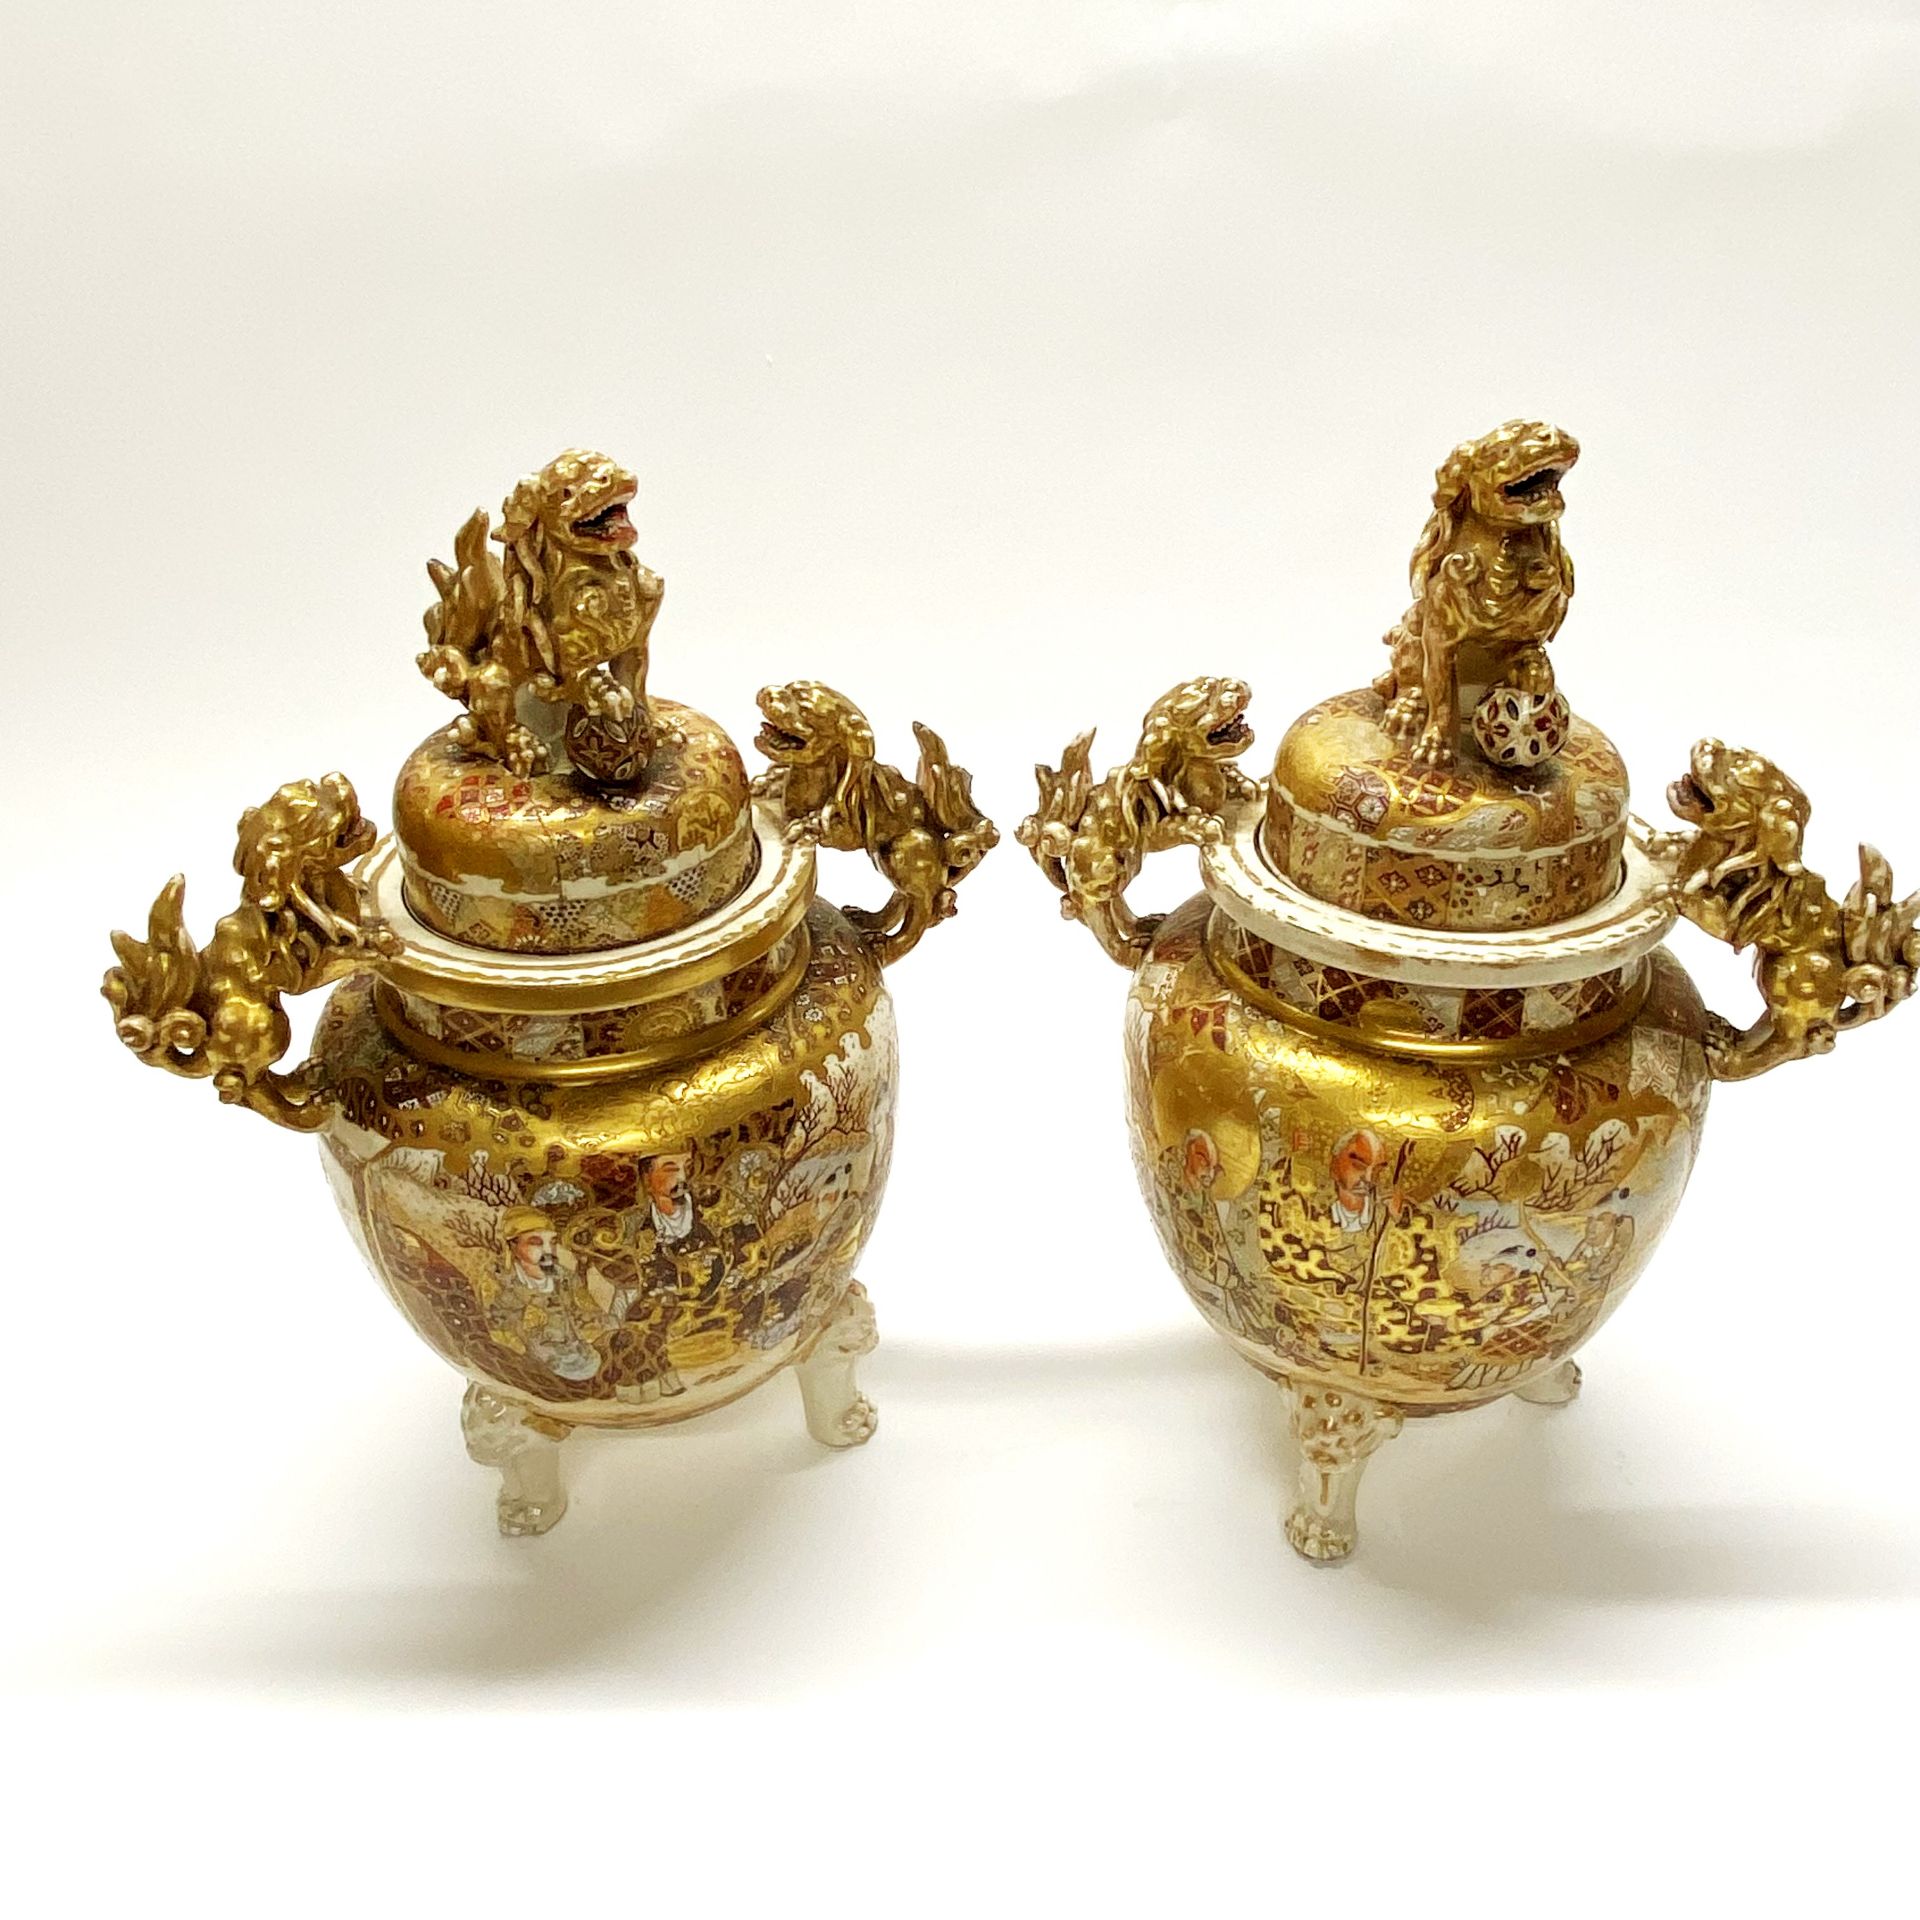 A pair of 19thC Japanese gilt porcelain koros. H. 39cm (repair to one lid) - Image 2 of 4